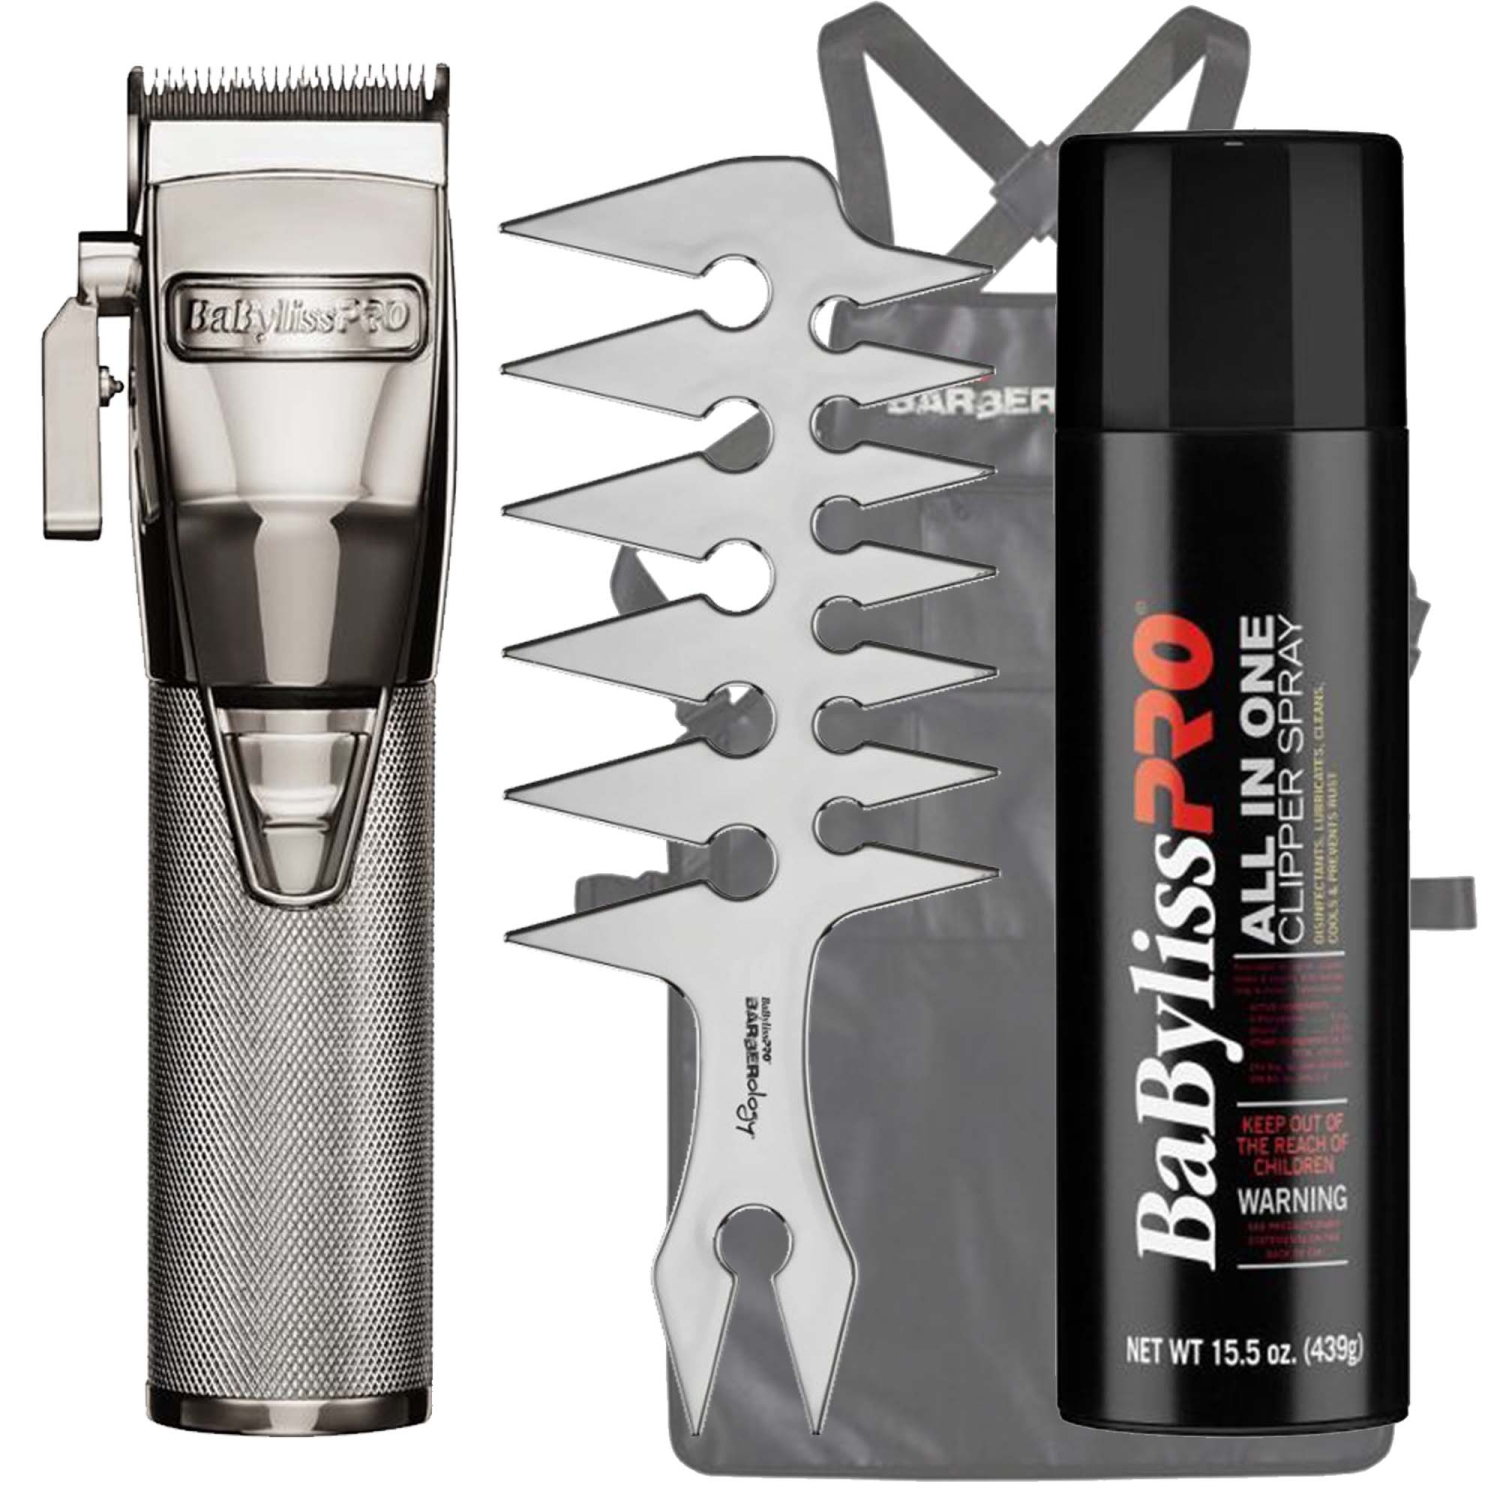 BaByliss PRO FX870S Cordless Clipper - Silver with Babyliss Pro Barber Kit